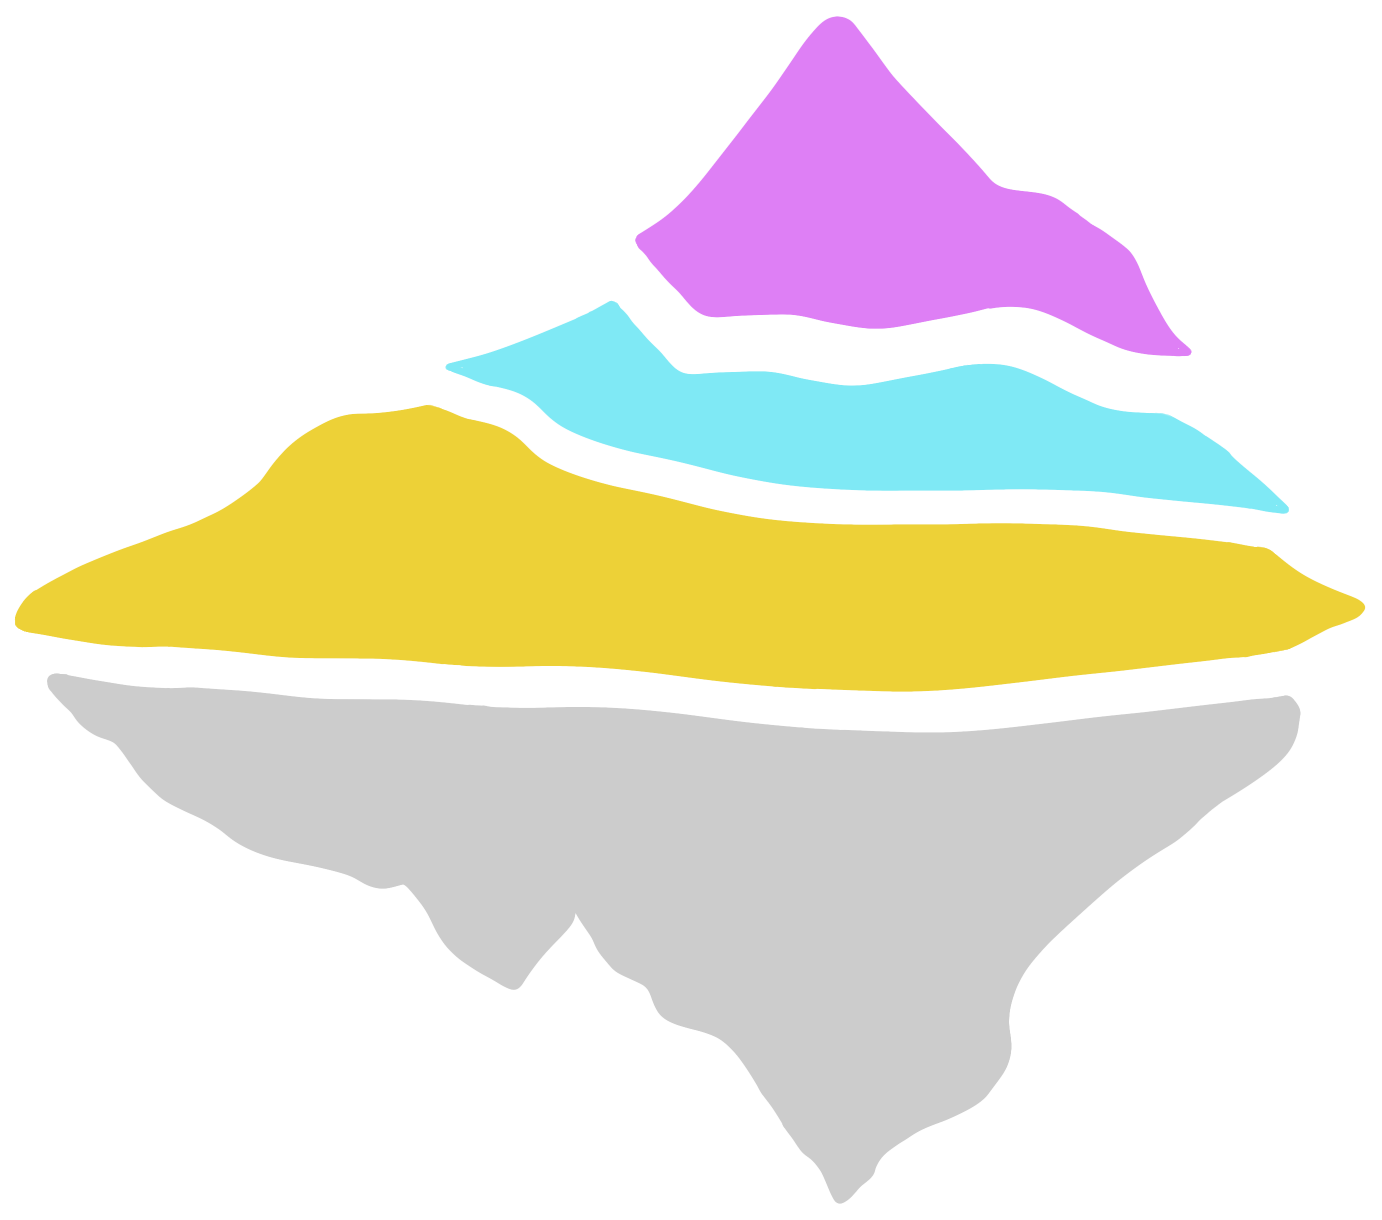 A floating island, broken into four layers, representing the different districts of the island.